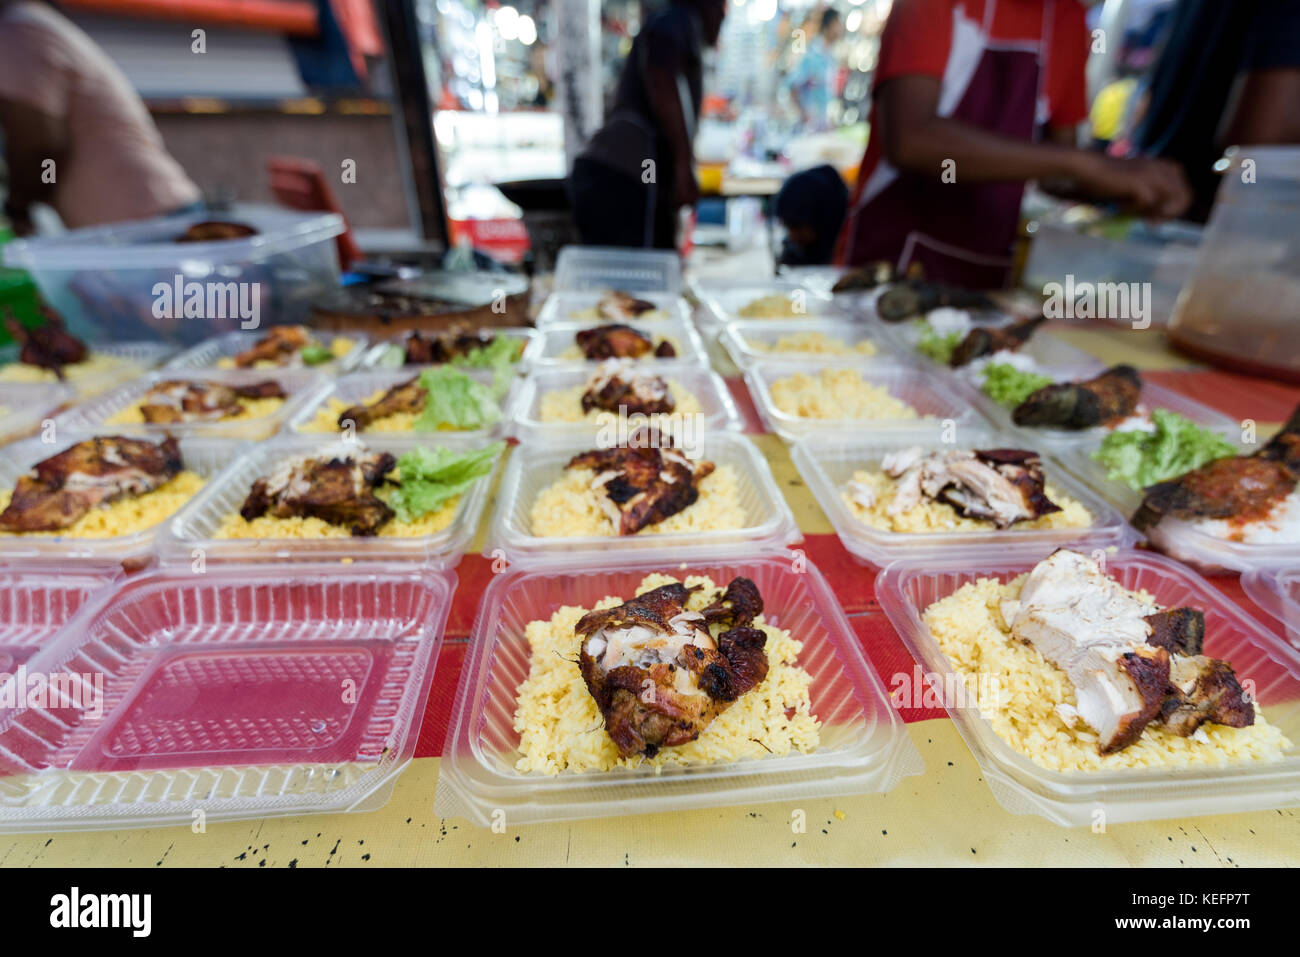 Many take away tubs of roasted chicken and rice waiting on a street food stall at a market in South east asia, Stock Photo